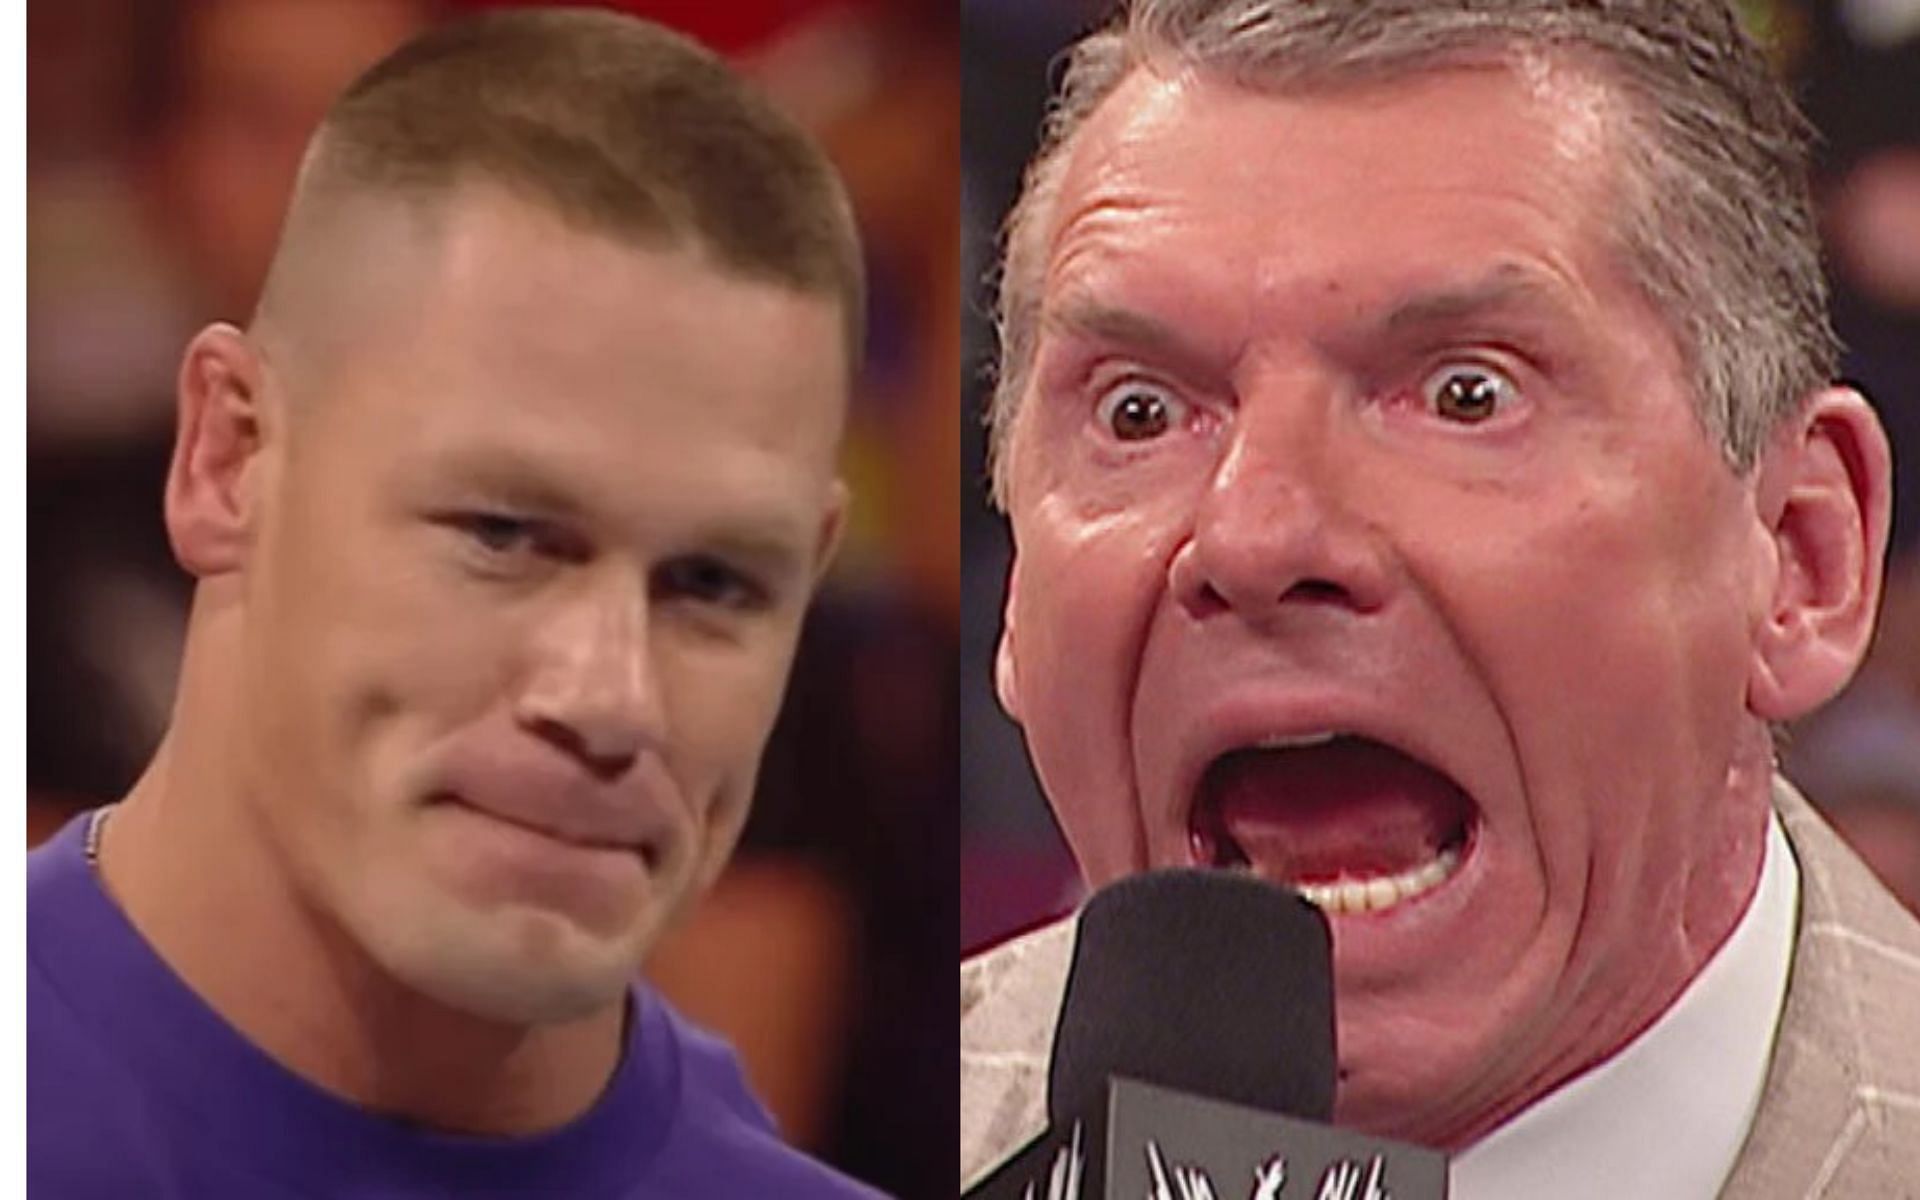 John Cena (left) and former WWE Chairman Vince McMahon (right).